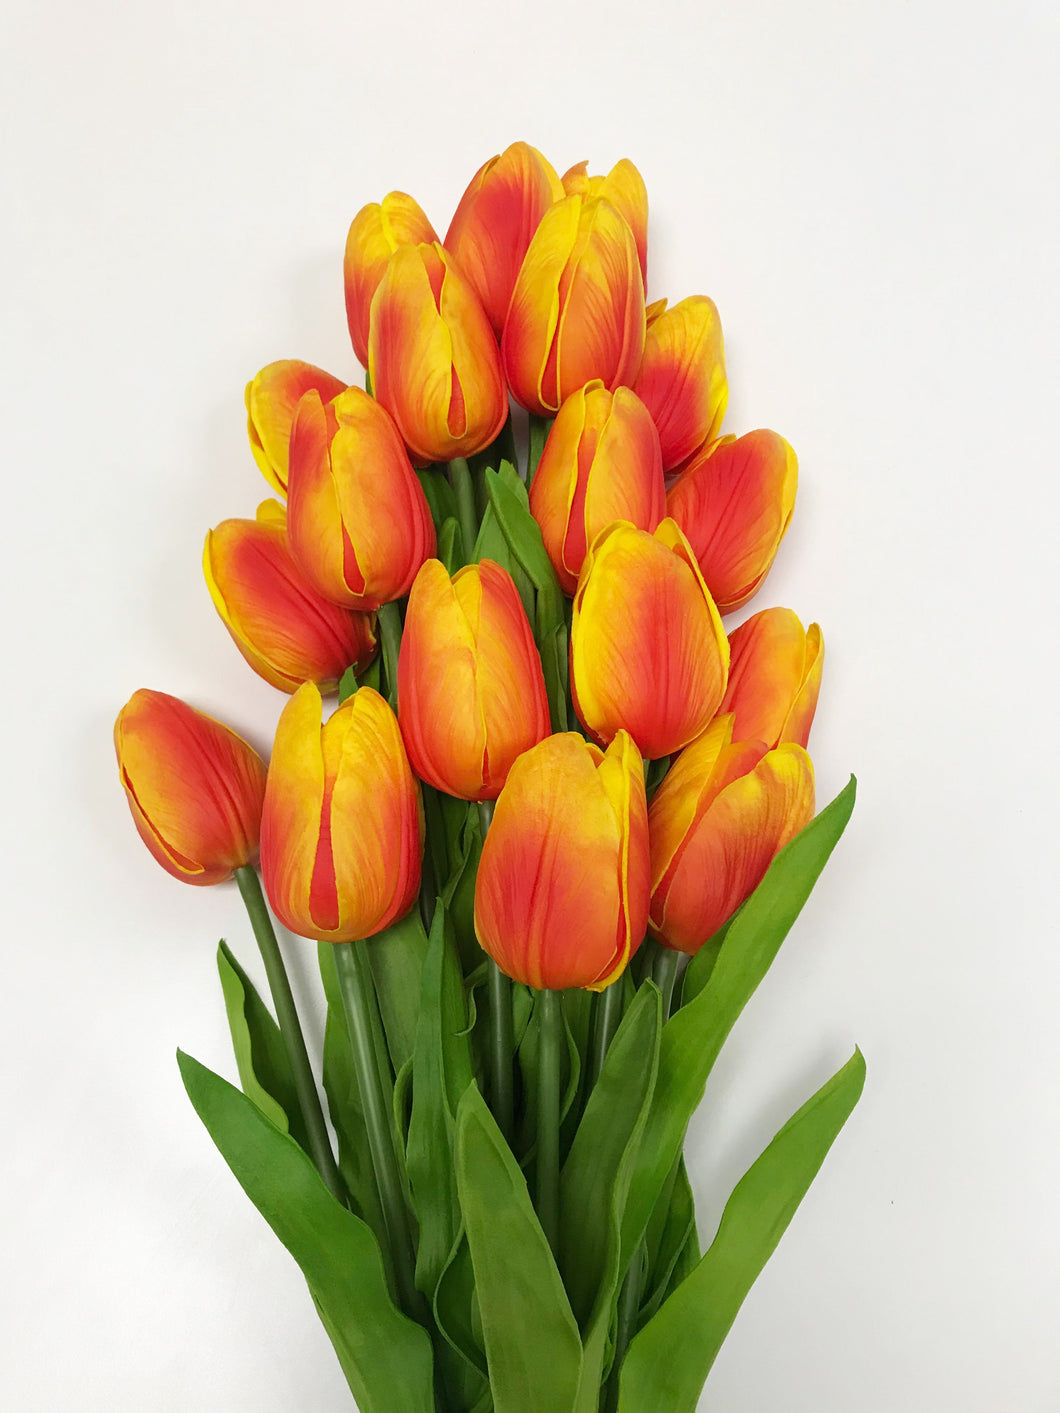 Tulip Flower Mini Real Touch With Stem Made From Premium PU Leather in Orange Color